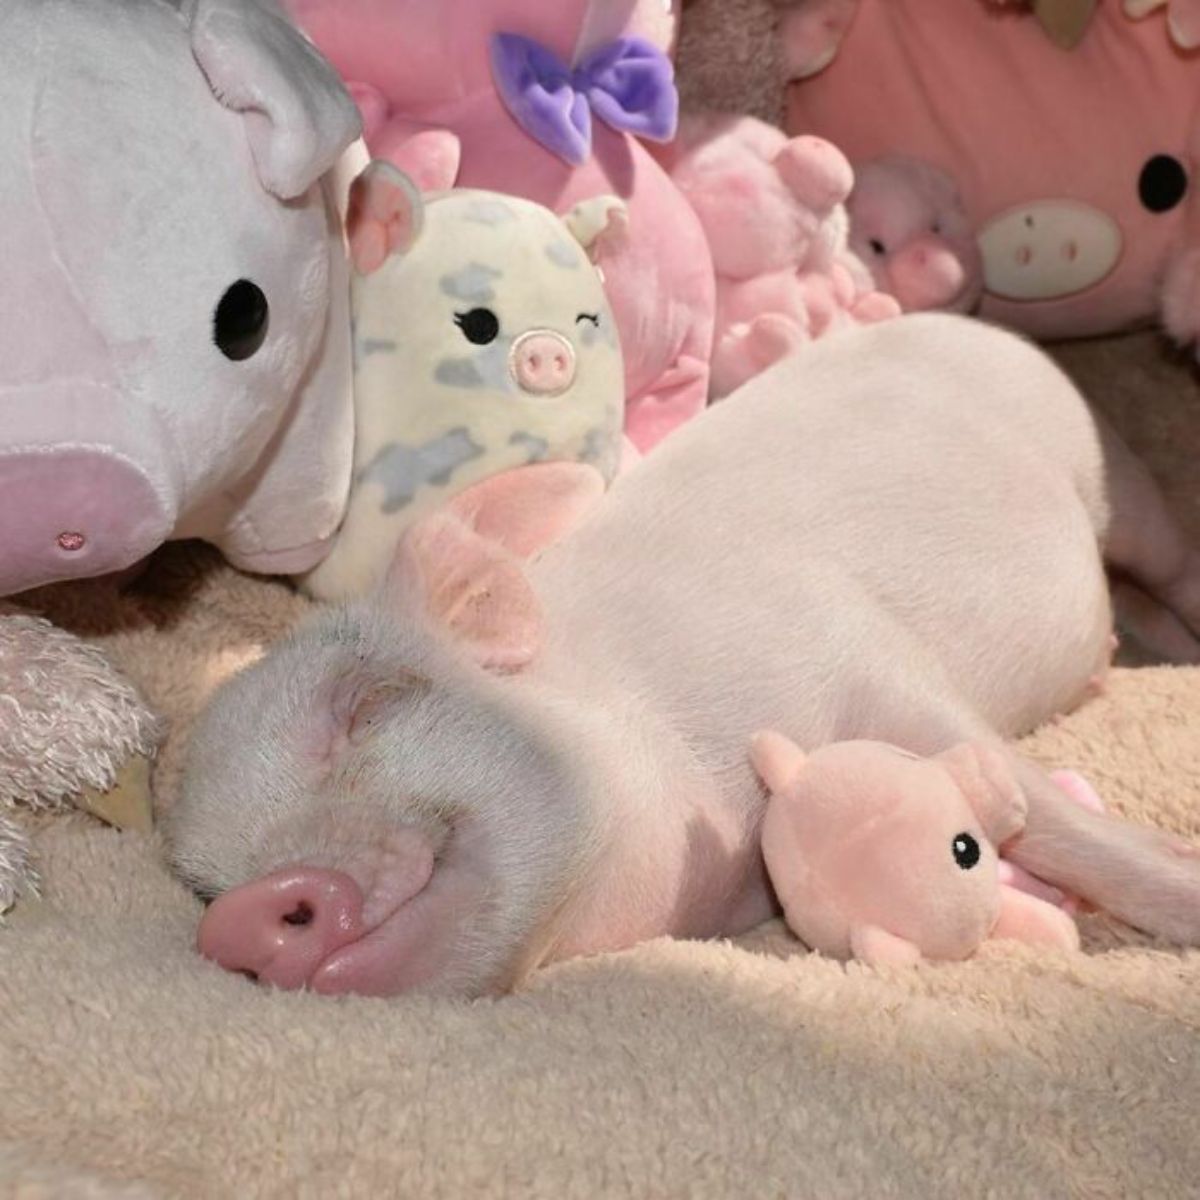 pink piglet sleeping on its side on a white blanket surrounded by pink and white stuffed pig toys